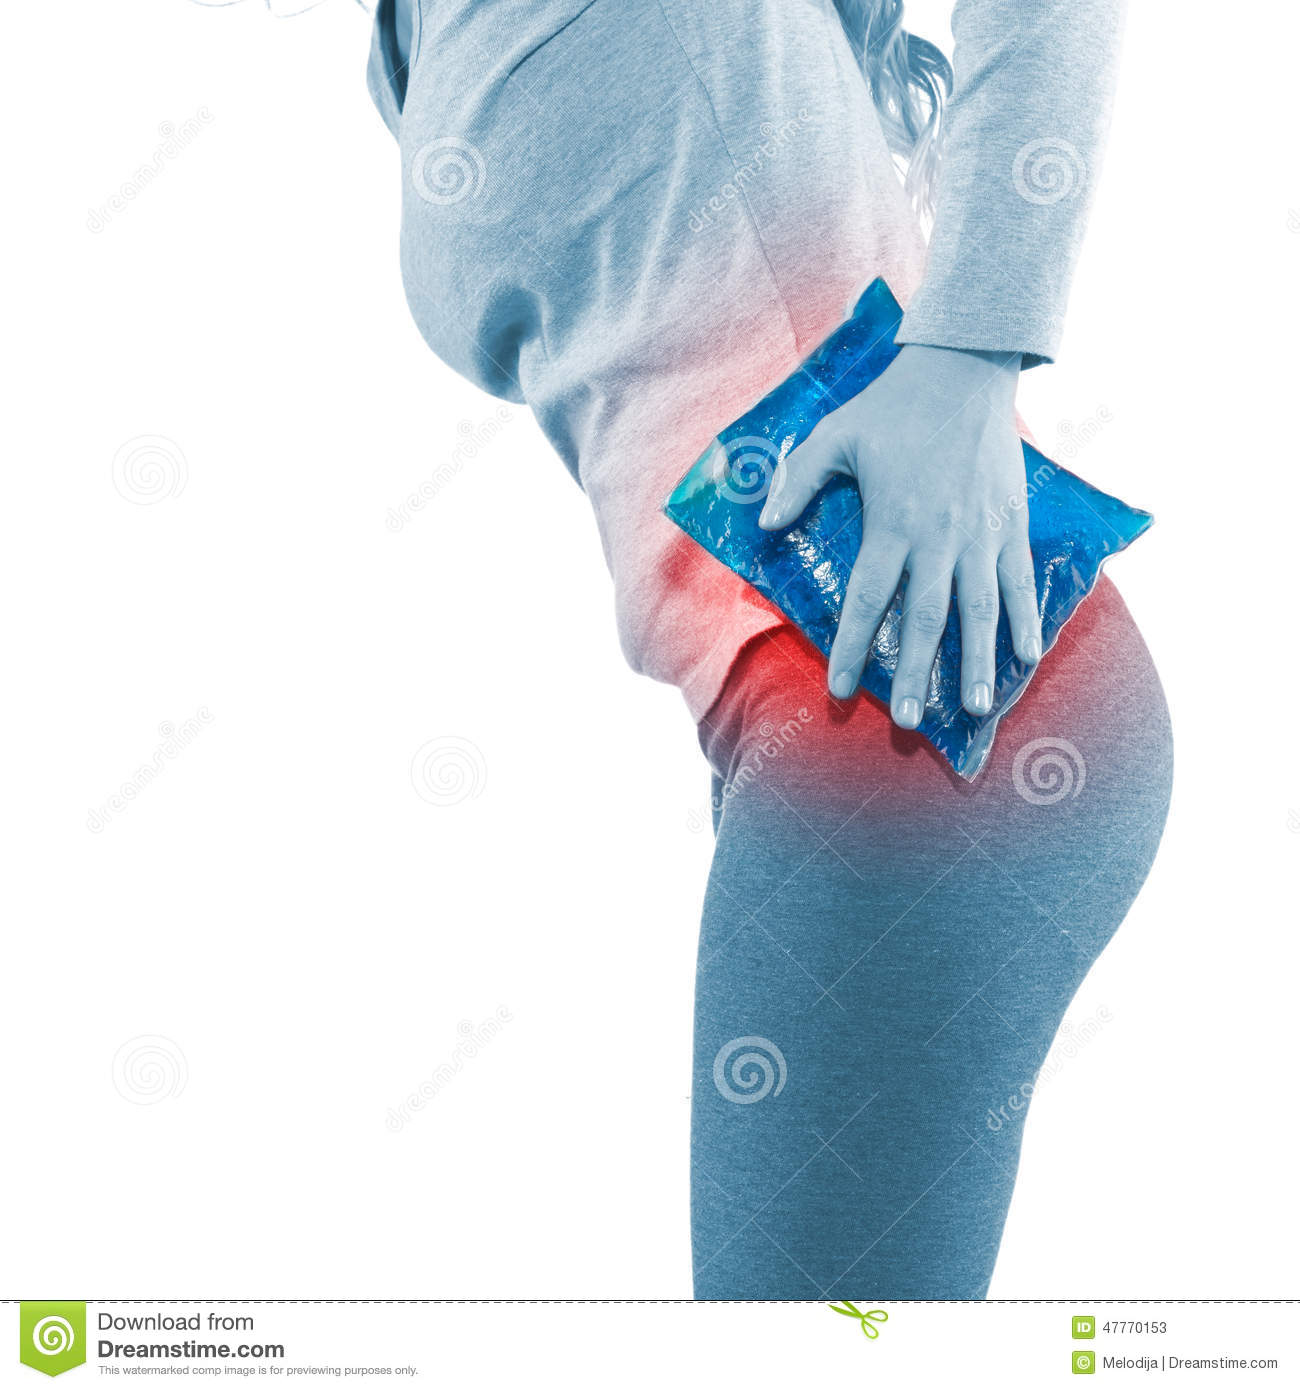 Cool Gel Pack On A Swollen Hurting Hip  Medical Concept Photo